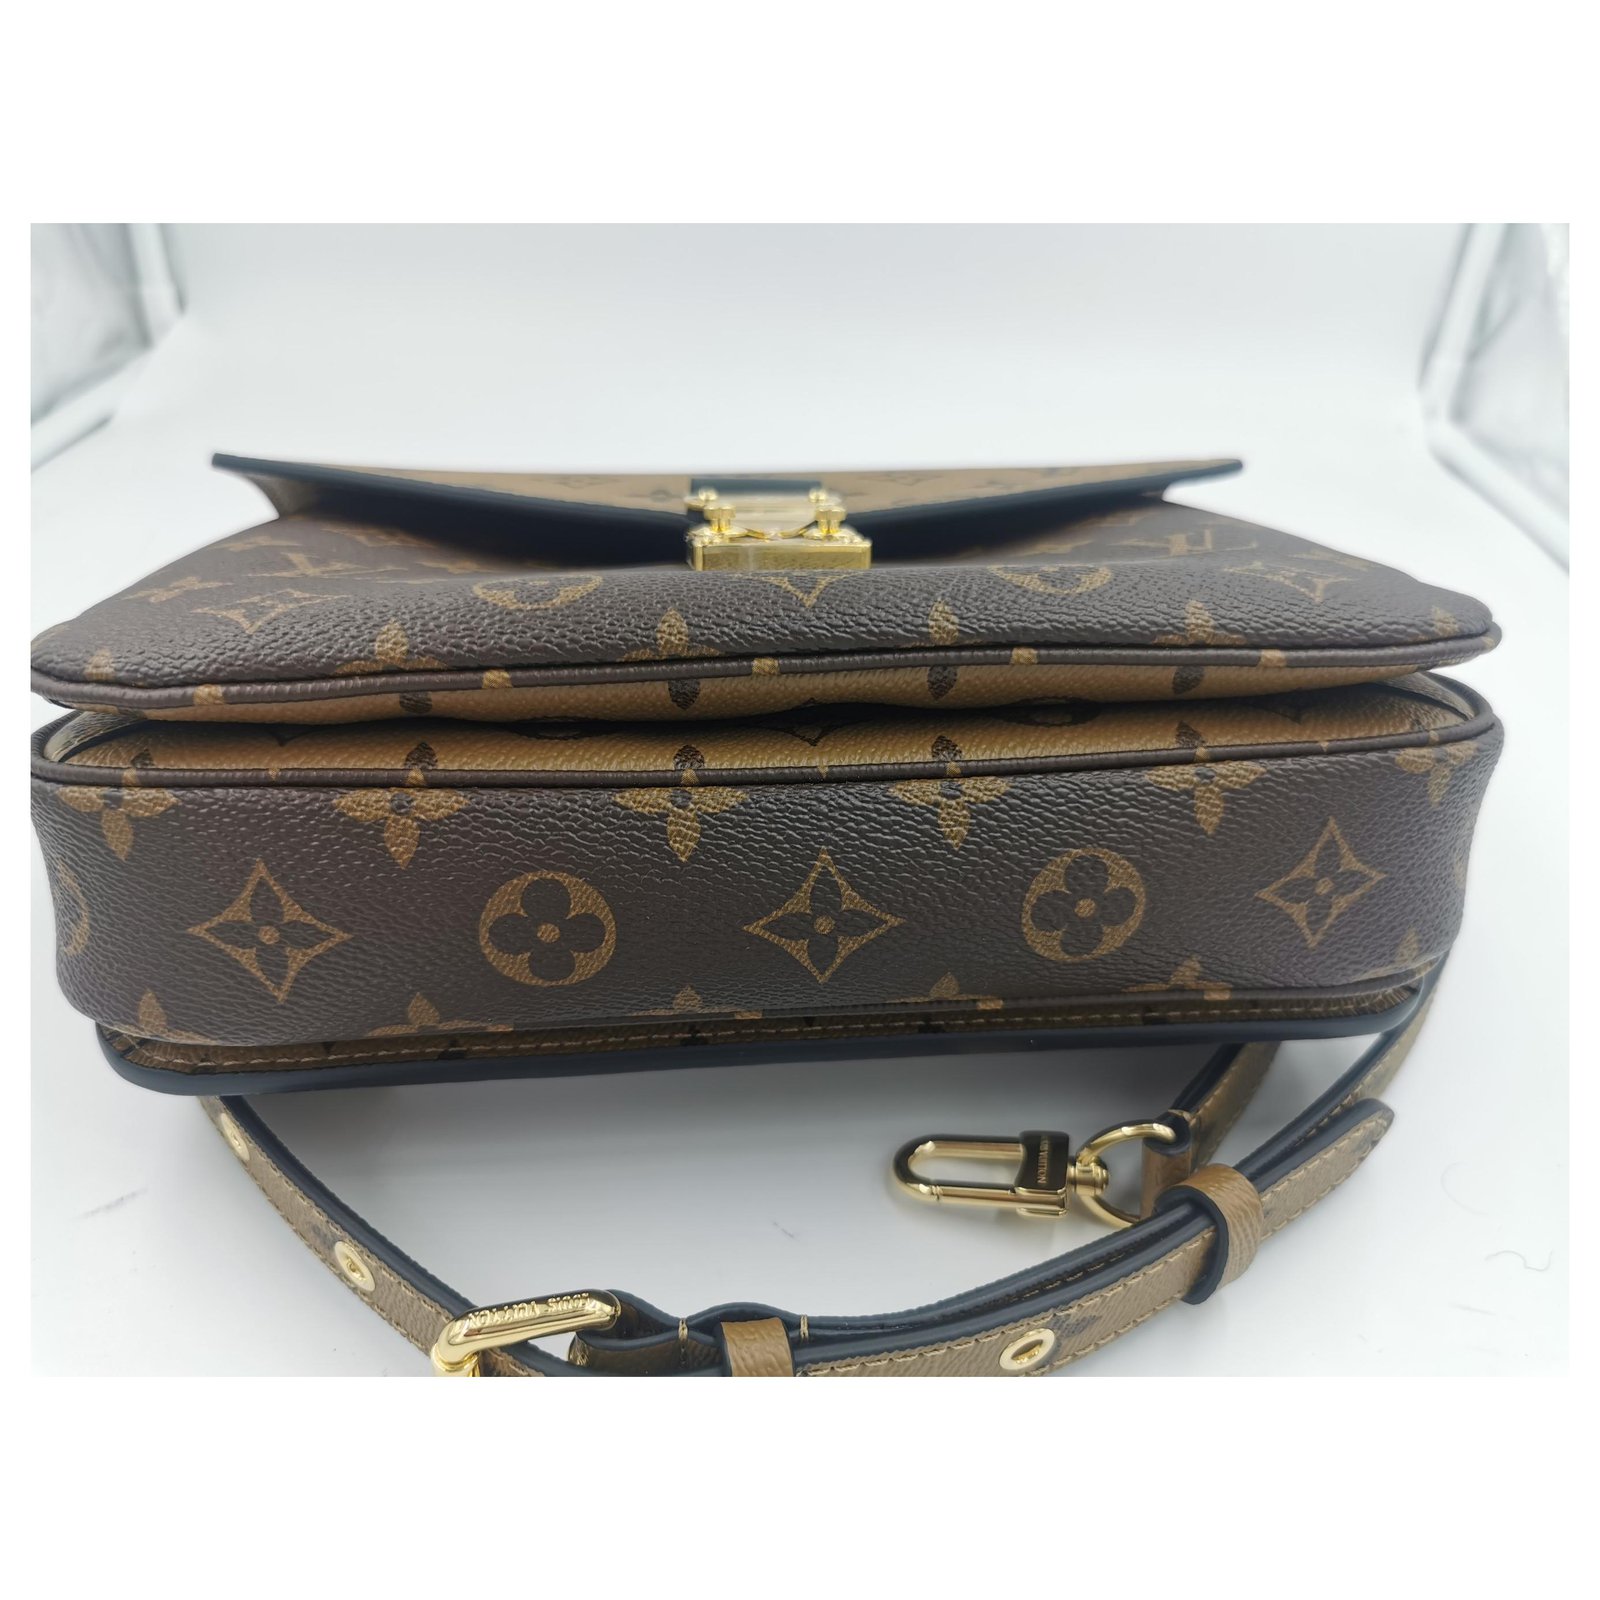 Metis leather satchel Louis Vuitton Brown in Leather - 36746127